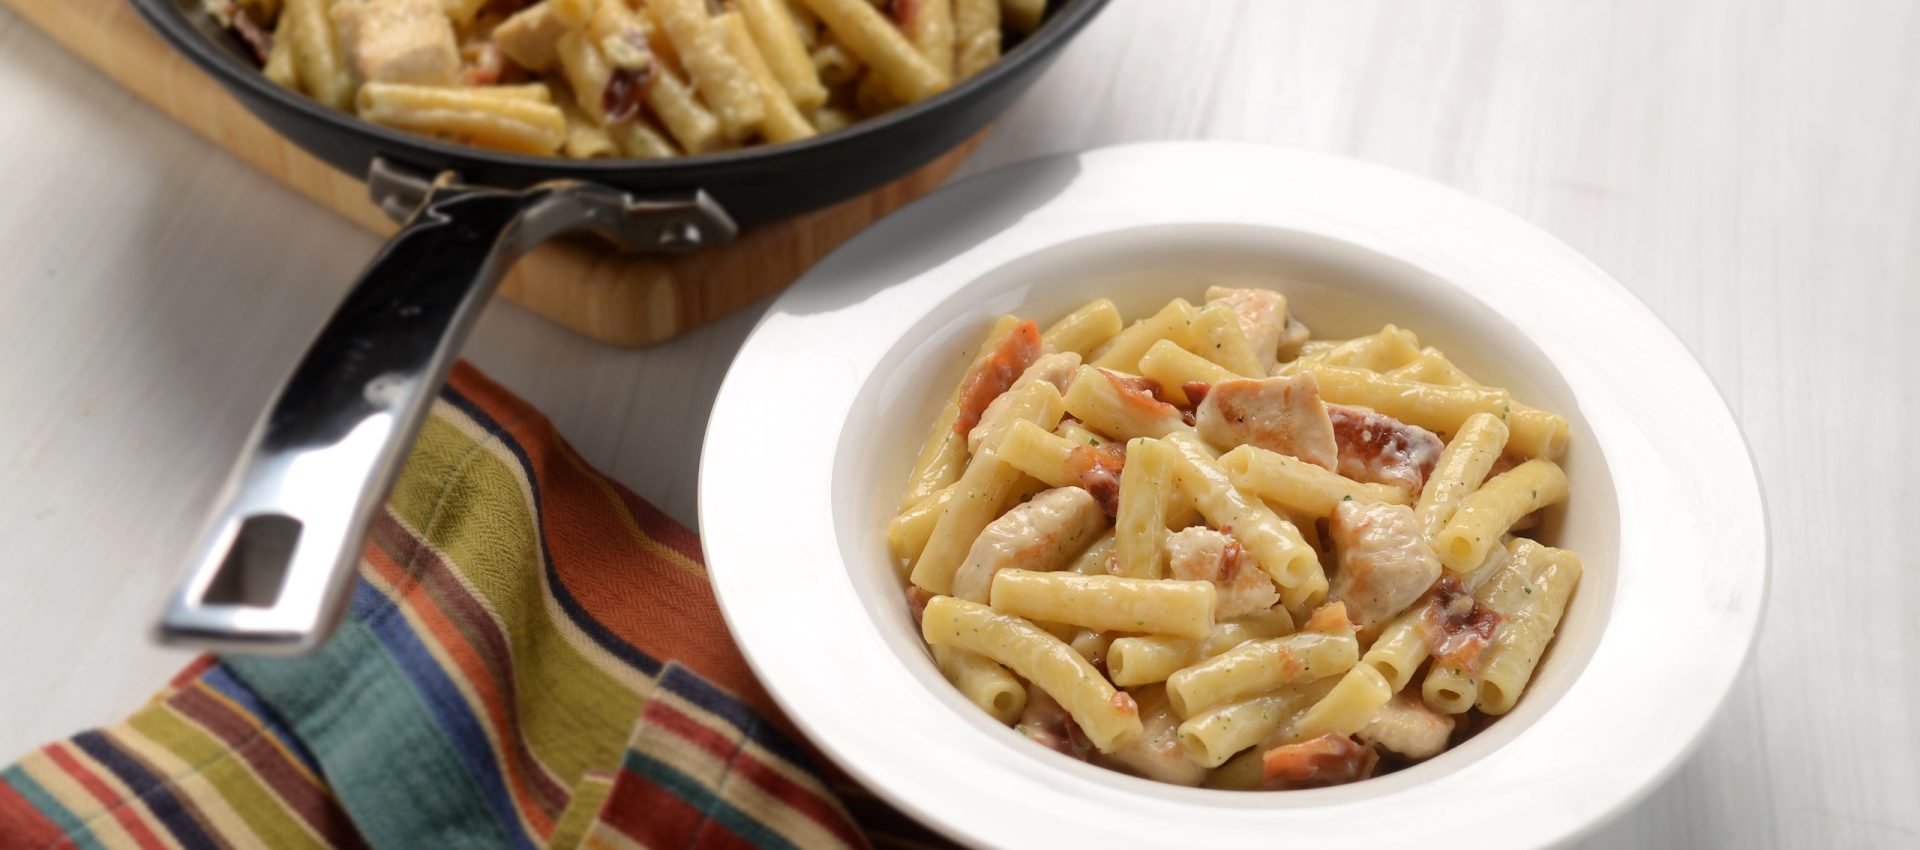 Bacon-Ranch-Chicken-Pasta-HR-1-scaled-1920x850 Bacon Ranch Chicken and Pasta Skillet